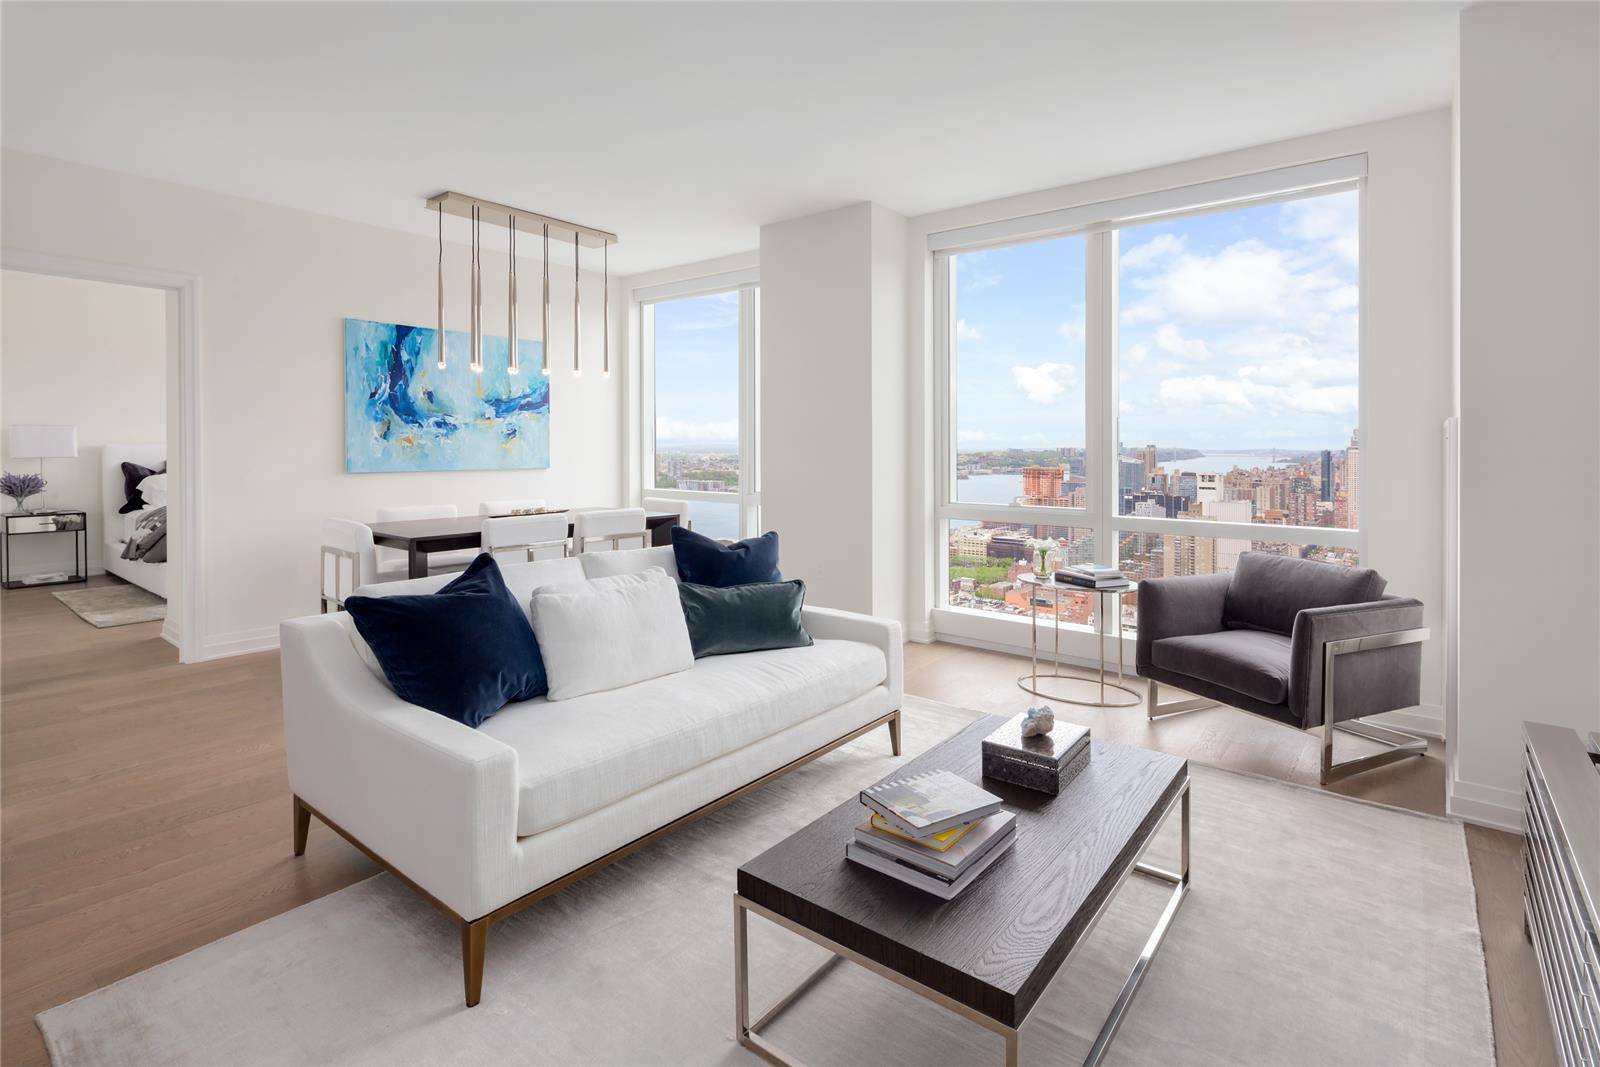 With residences starting on the 56th floor, 56N is a stunning One Bedroom One and Half Bath residence of 942 square feet.